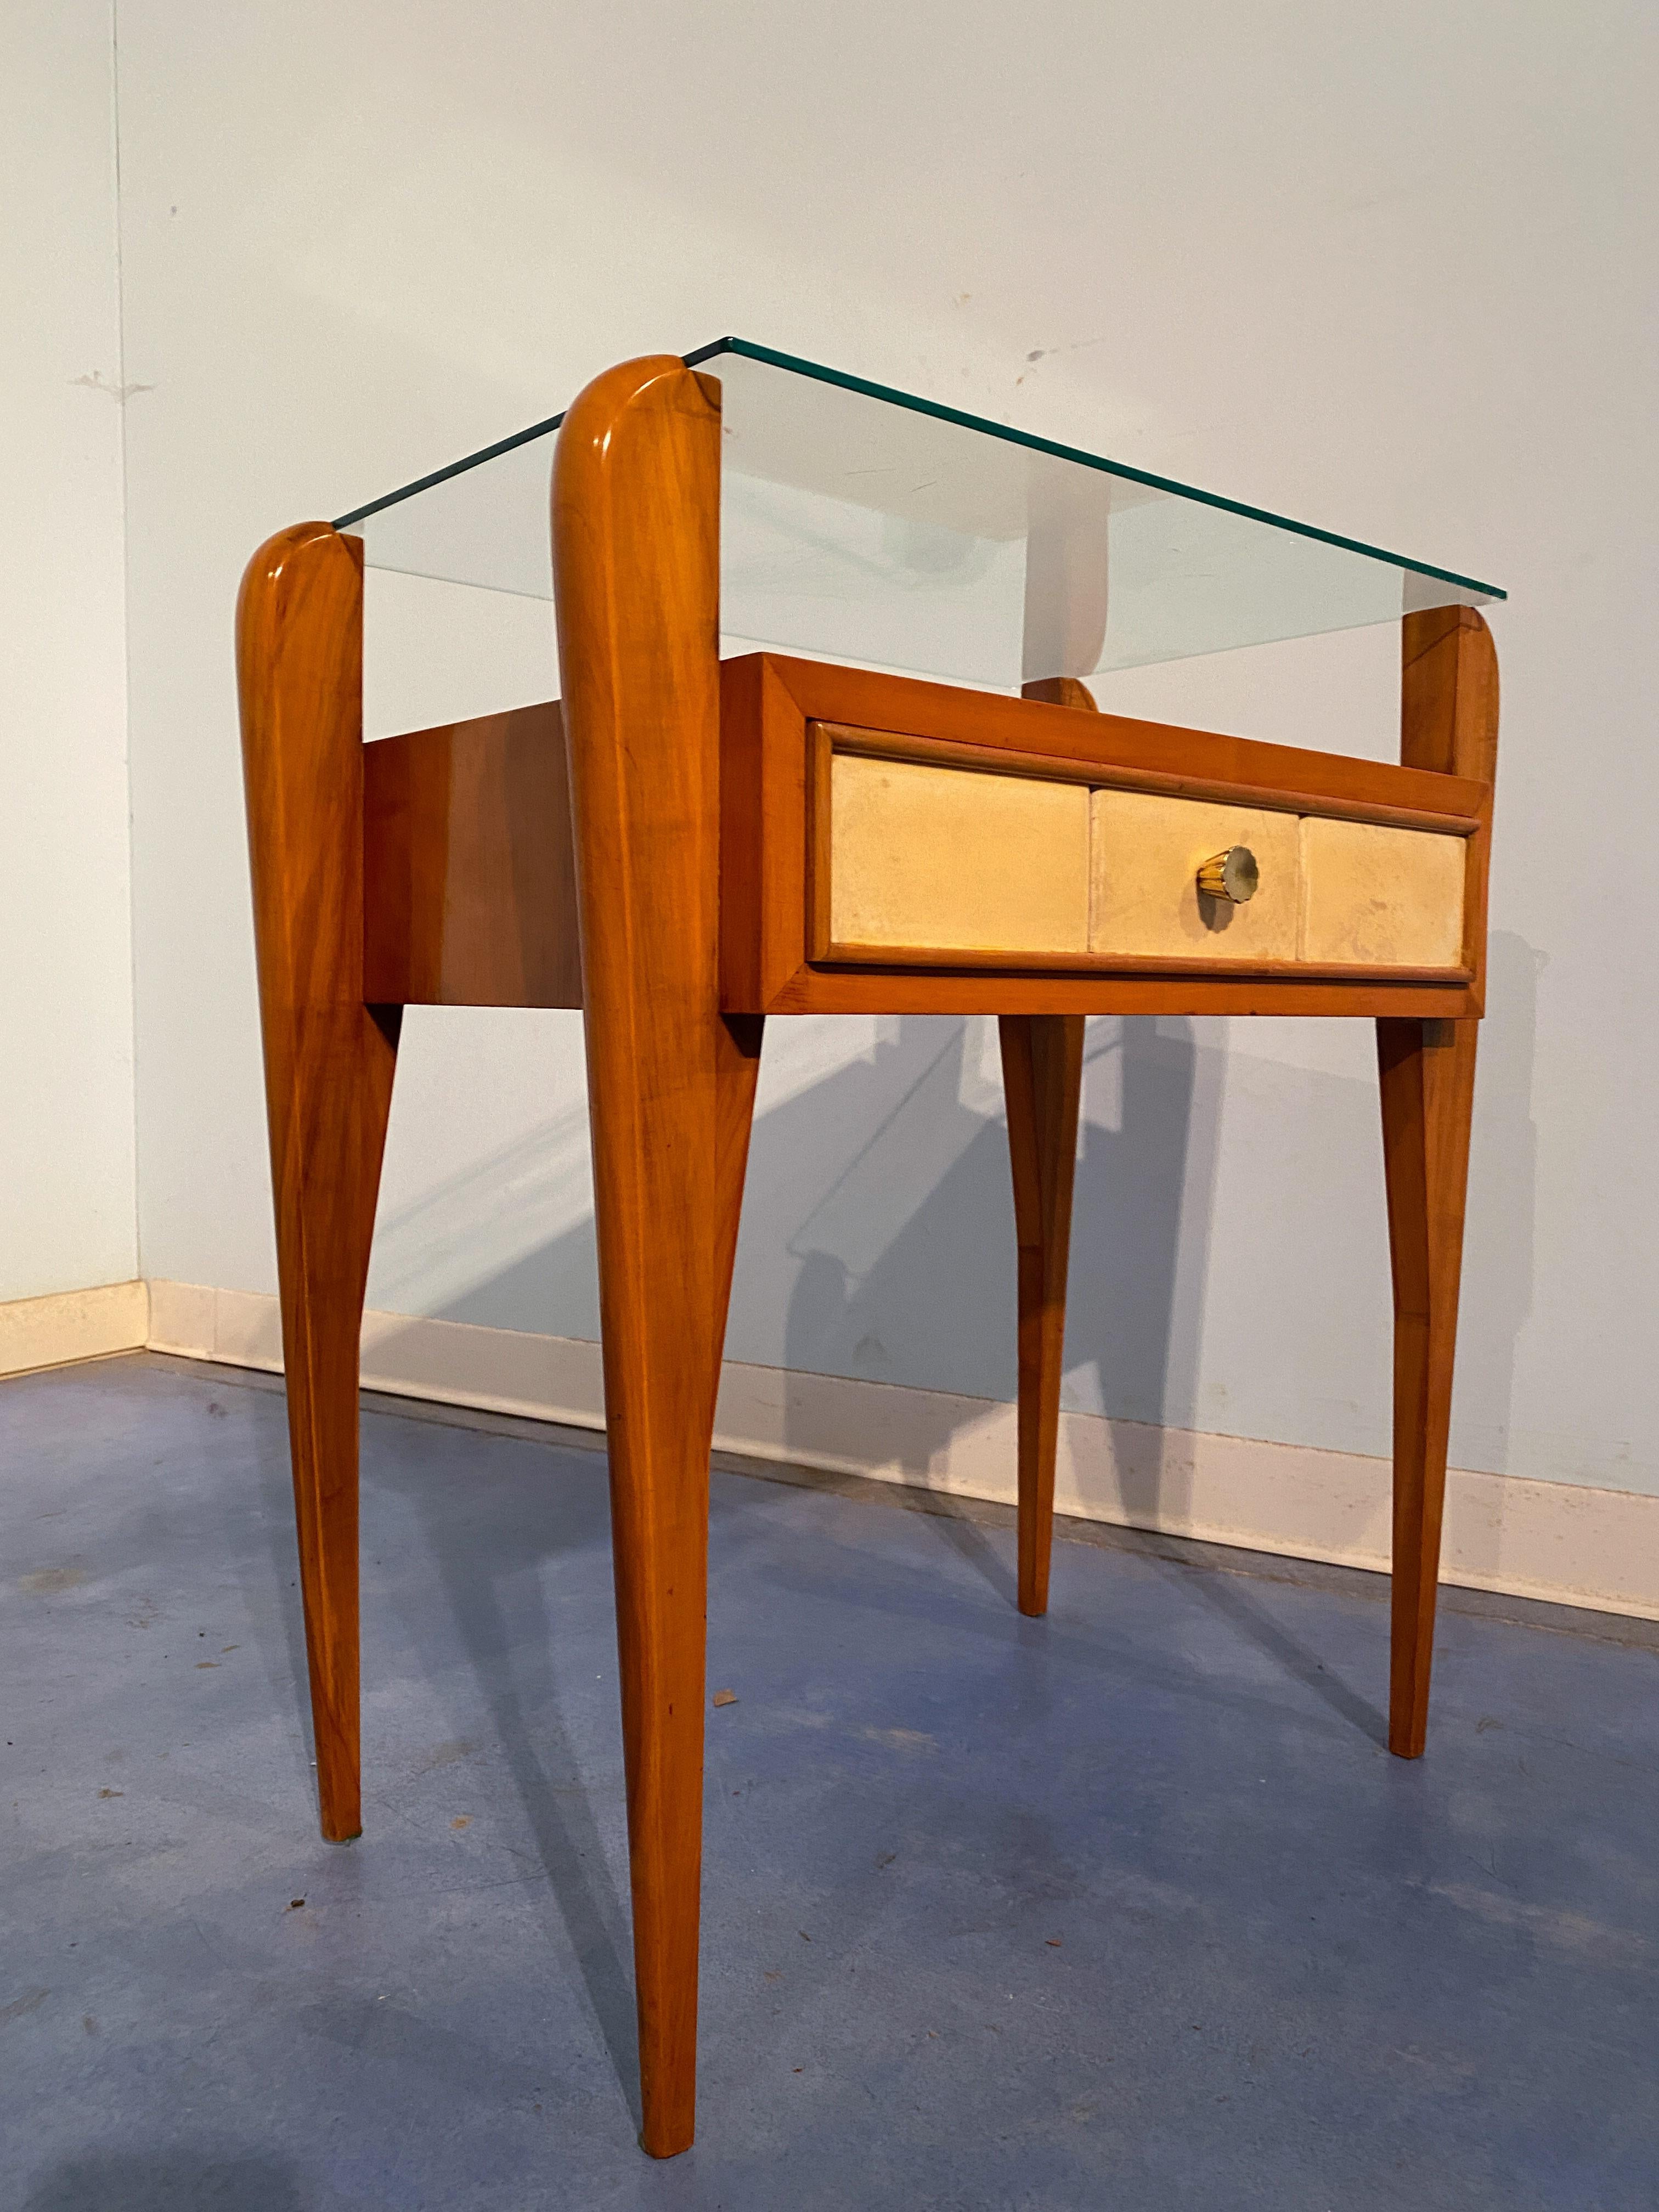 Italian Mid-Century Parchment Bedside or Nightstands by Osvaldo Borsani, 1950 For Sale 5